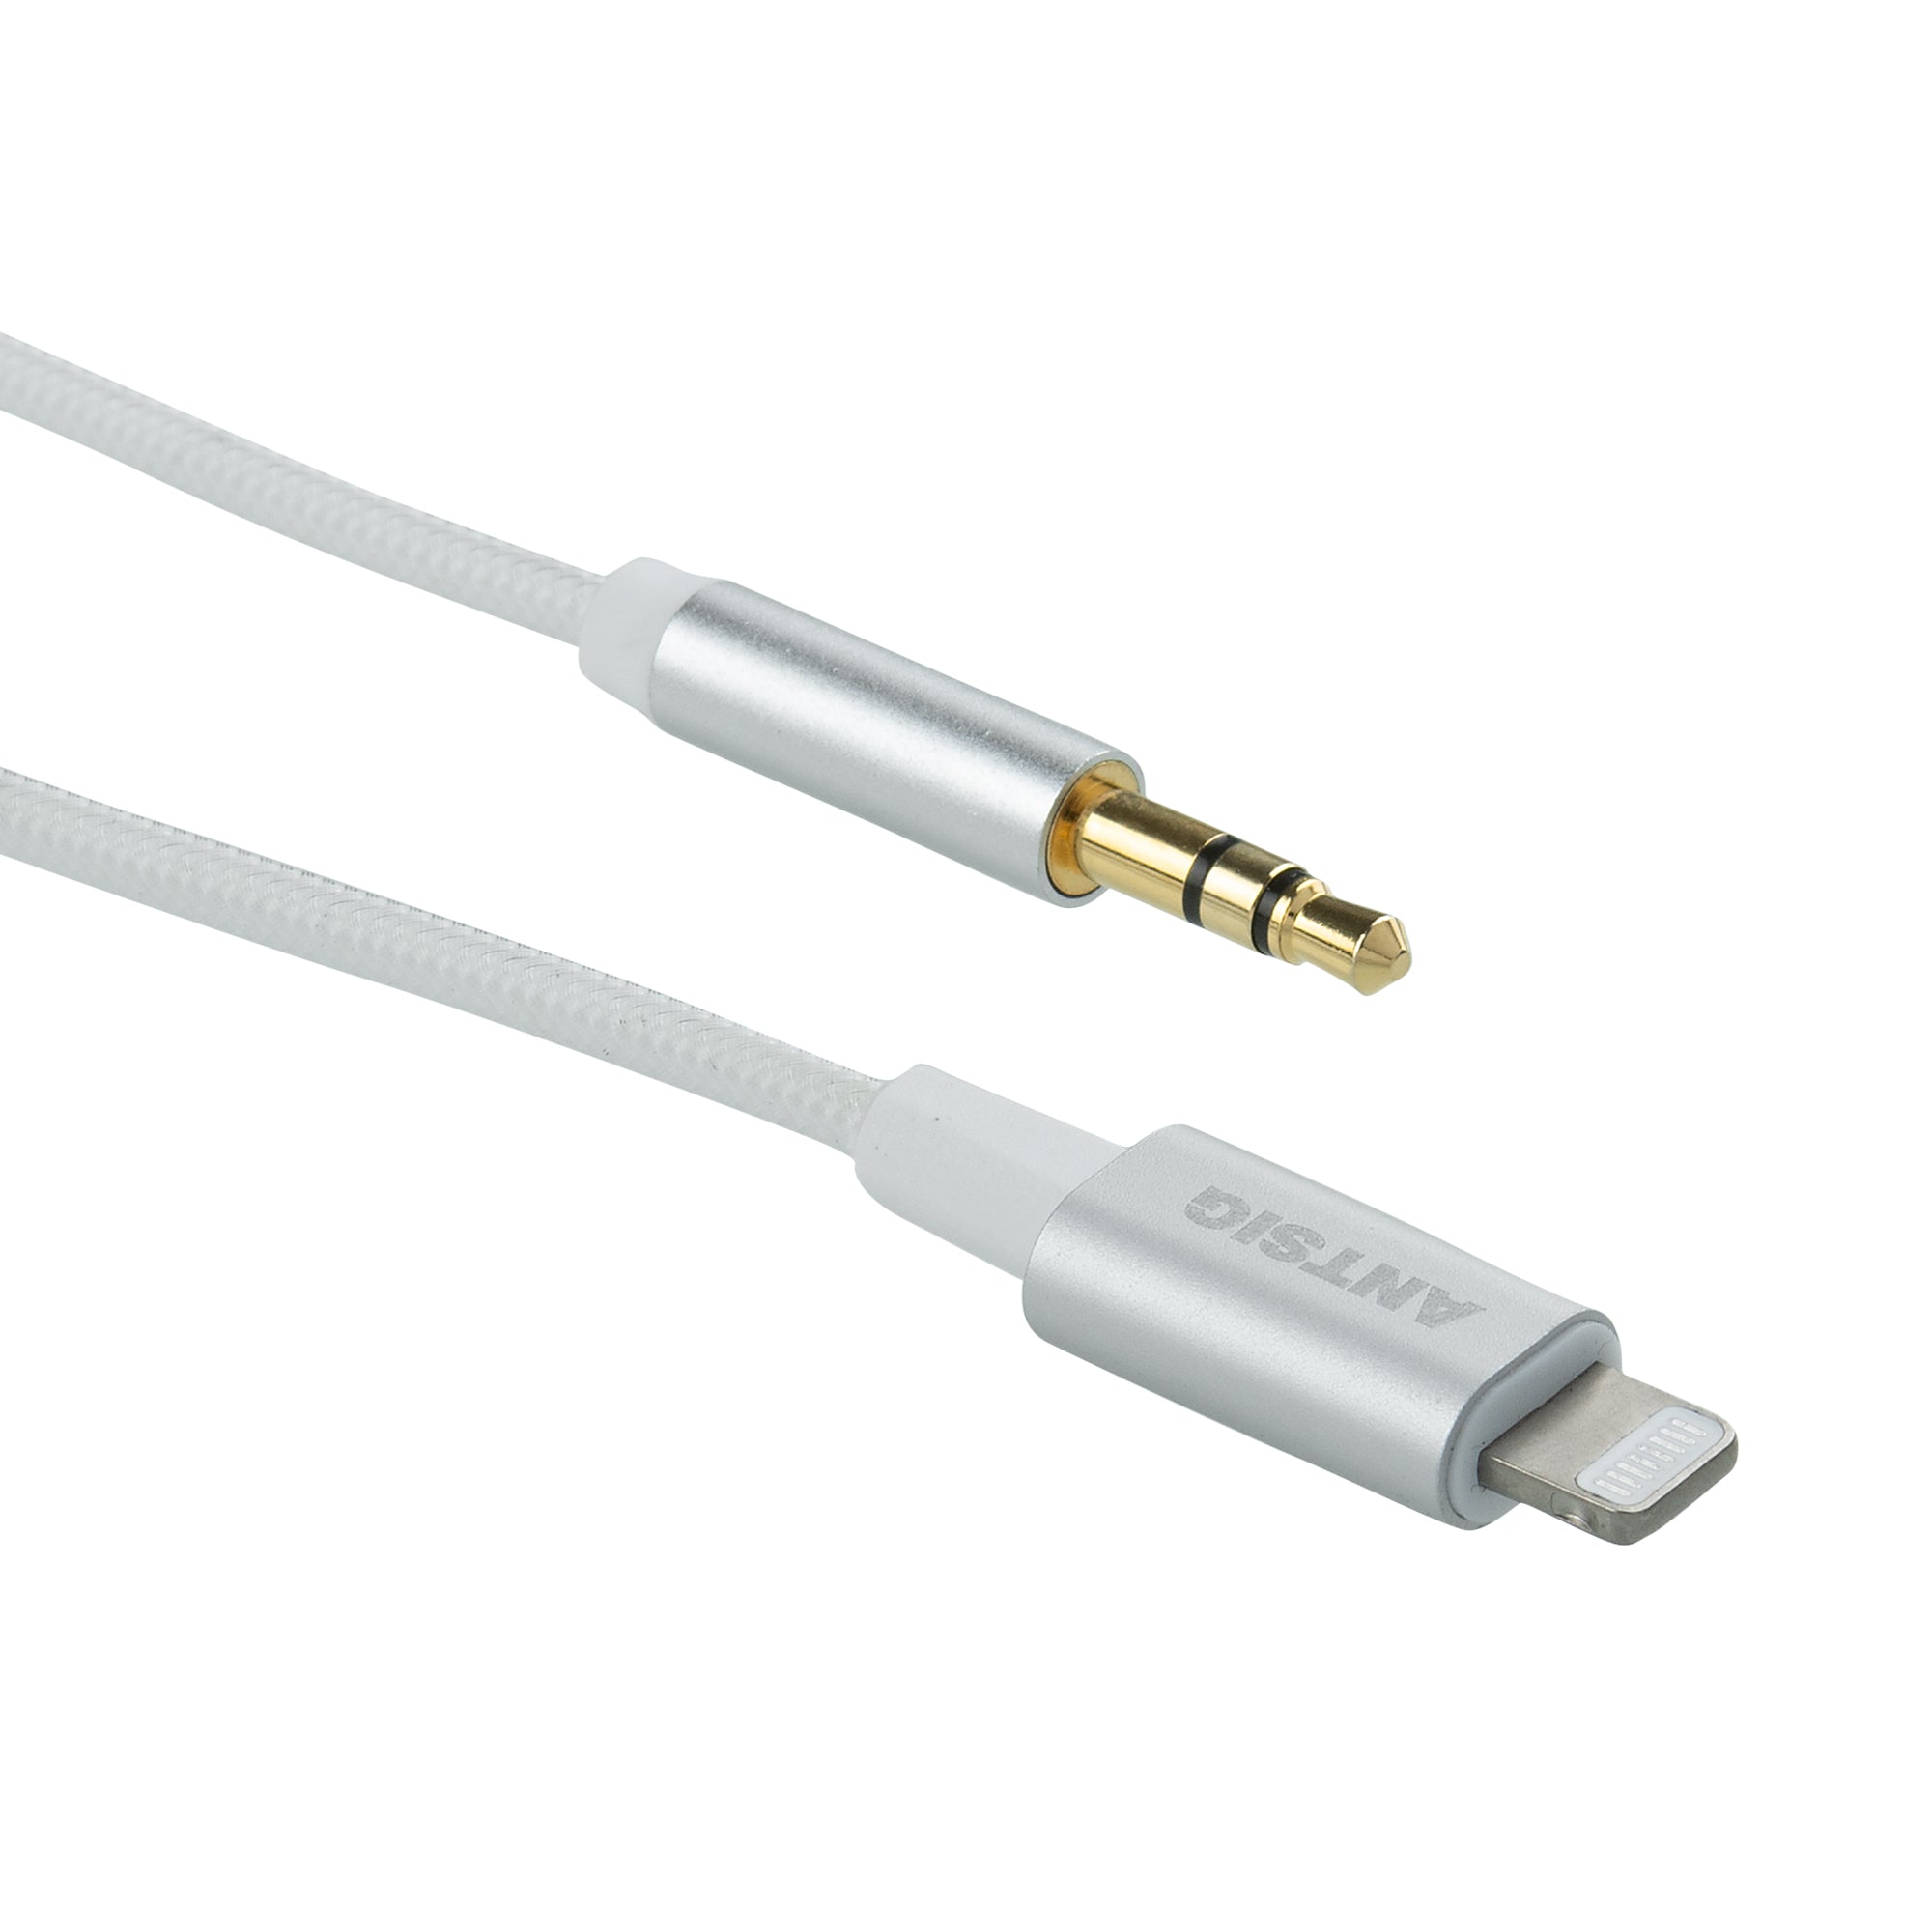 1m Lightning to 3.5mm AUX Male Cable